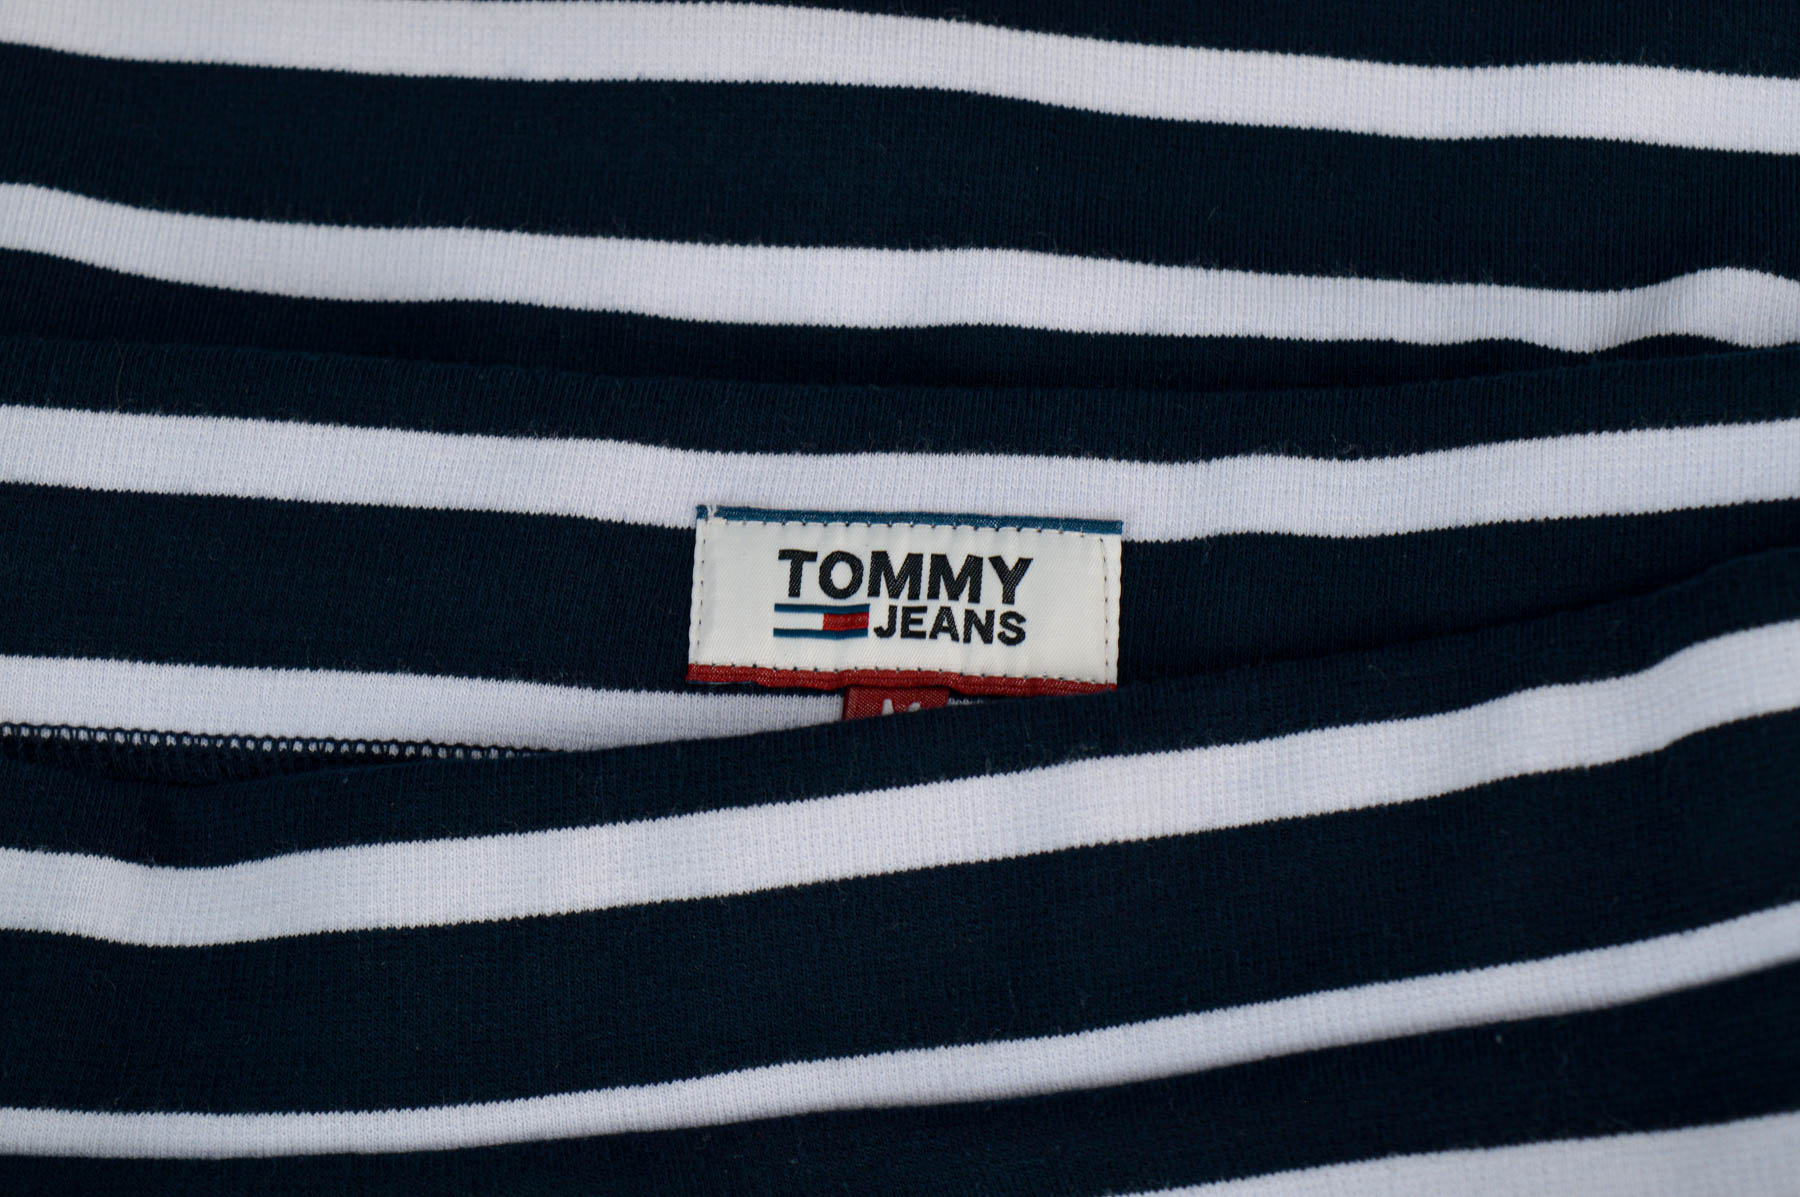 Skirt - TOMMY JEANS - 2